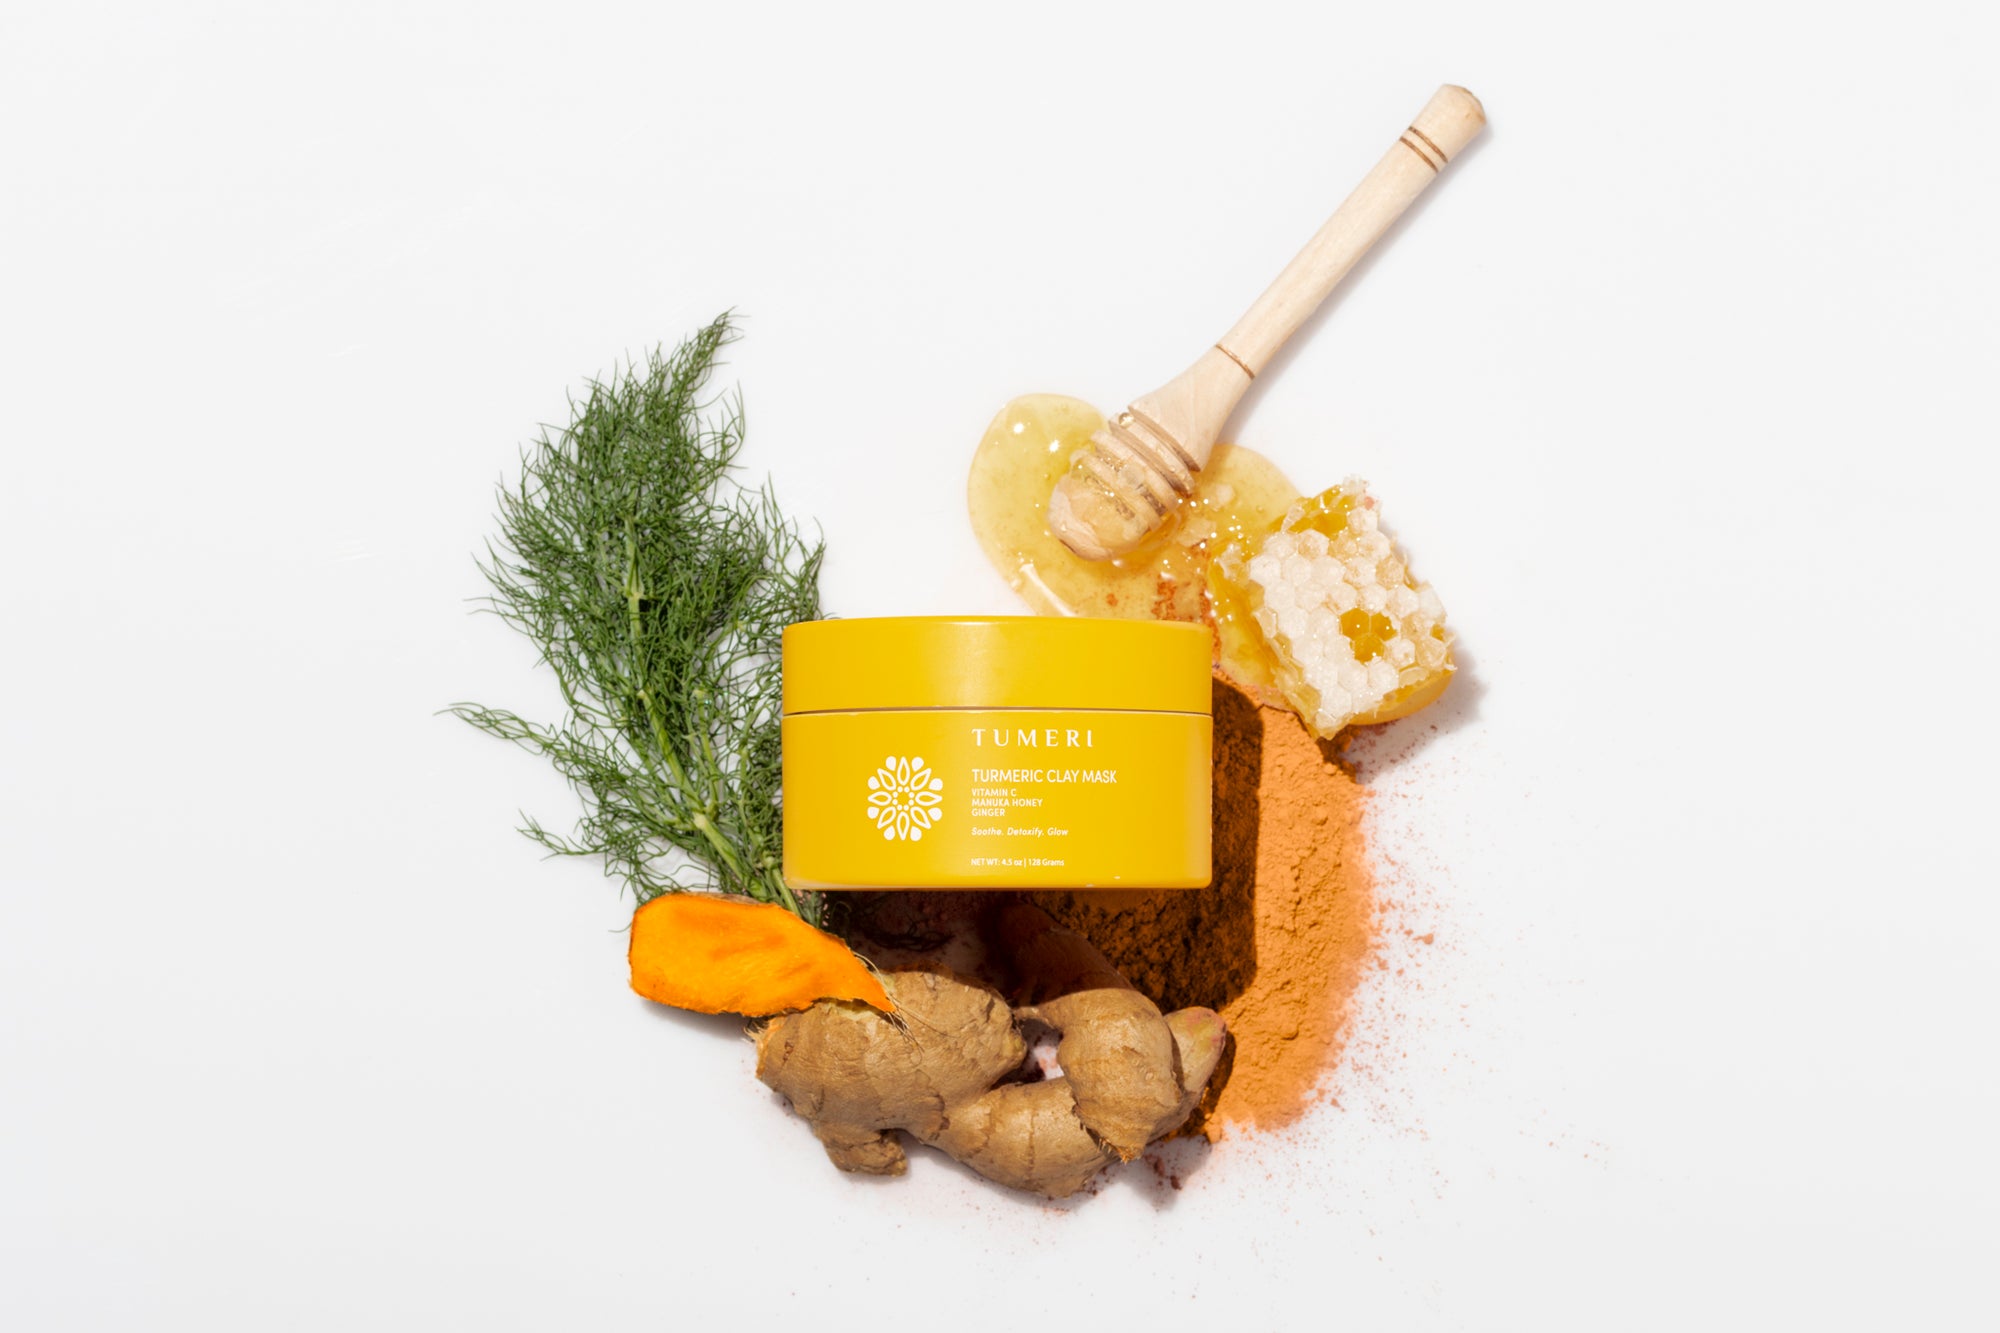 A guide on how to use turmeric for your skin